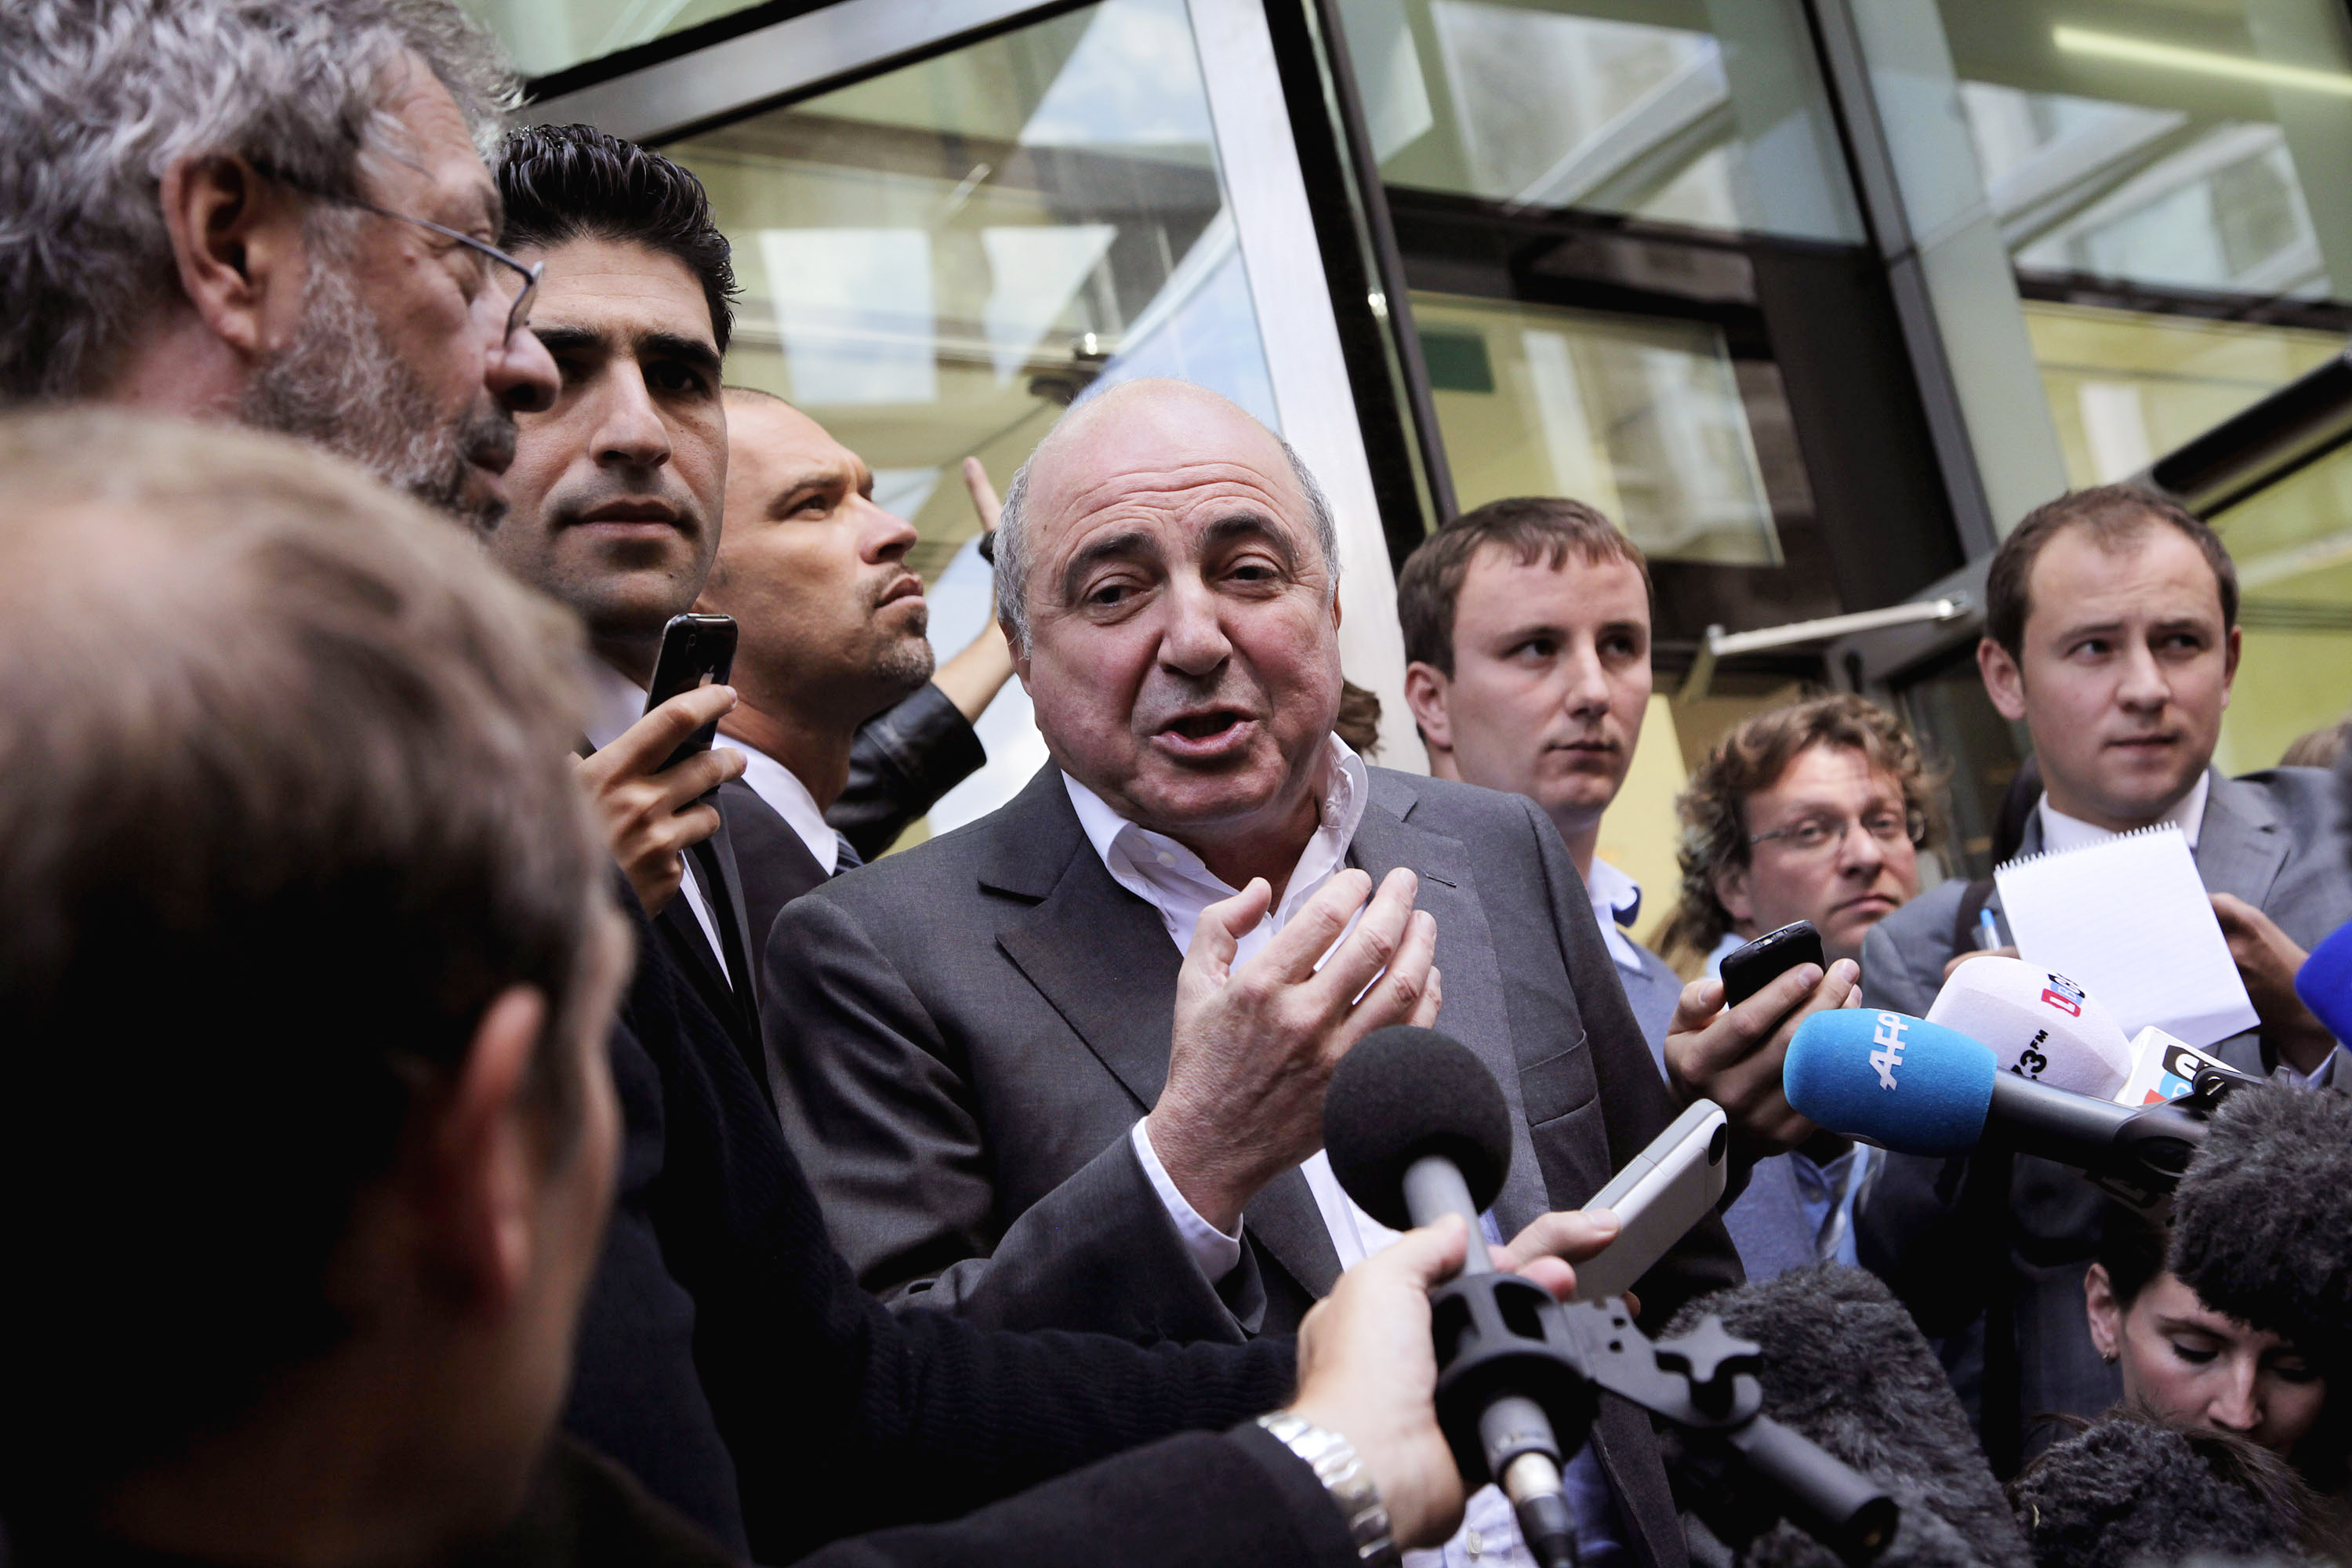 Boris Berezovsky addresses the media outside the Royal Courts of Justice after losing his lawsuit against Chelsea FC owner Roman Abramovich on August 31, 2012 in London, England. Berezovsky sued Abramovich for billions of pounds, claiming he was "intimidated" into selling shares in oil group Sibneft at below market value. (Warrick Page—Getty Images)